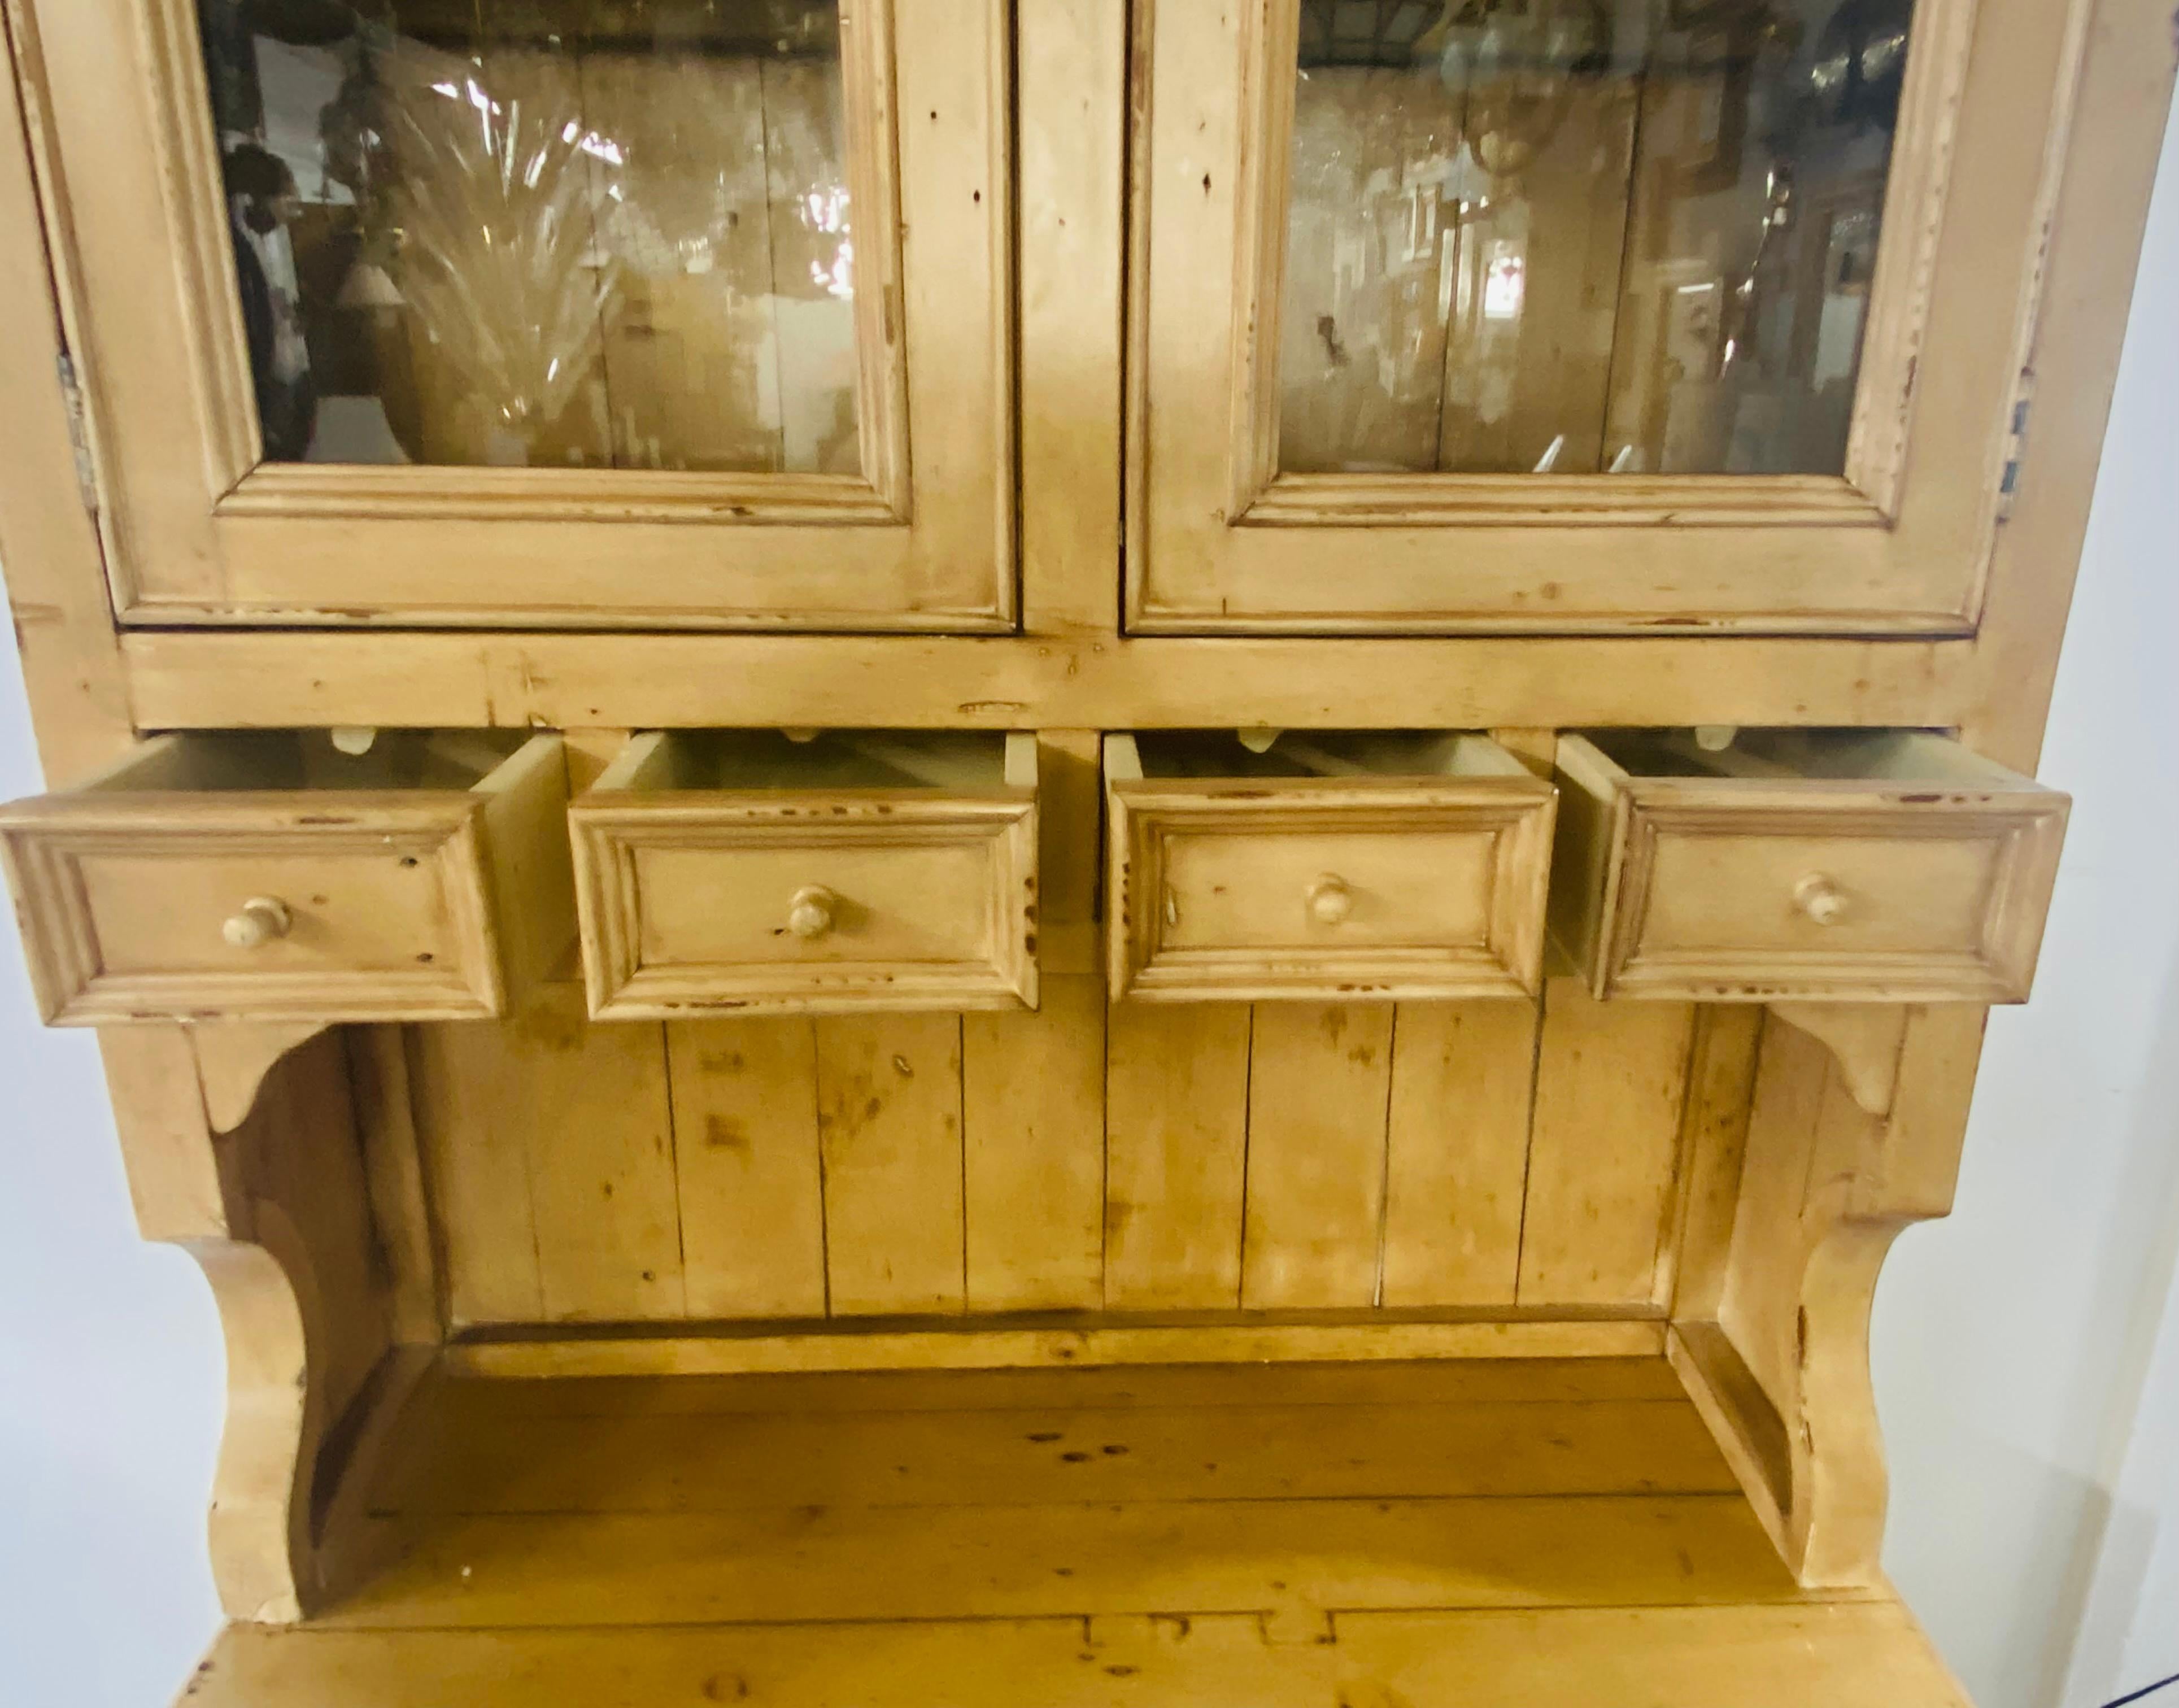 French Provincial Antique French Farm Style Cabinet with Hutch in Off-White/ Beige